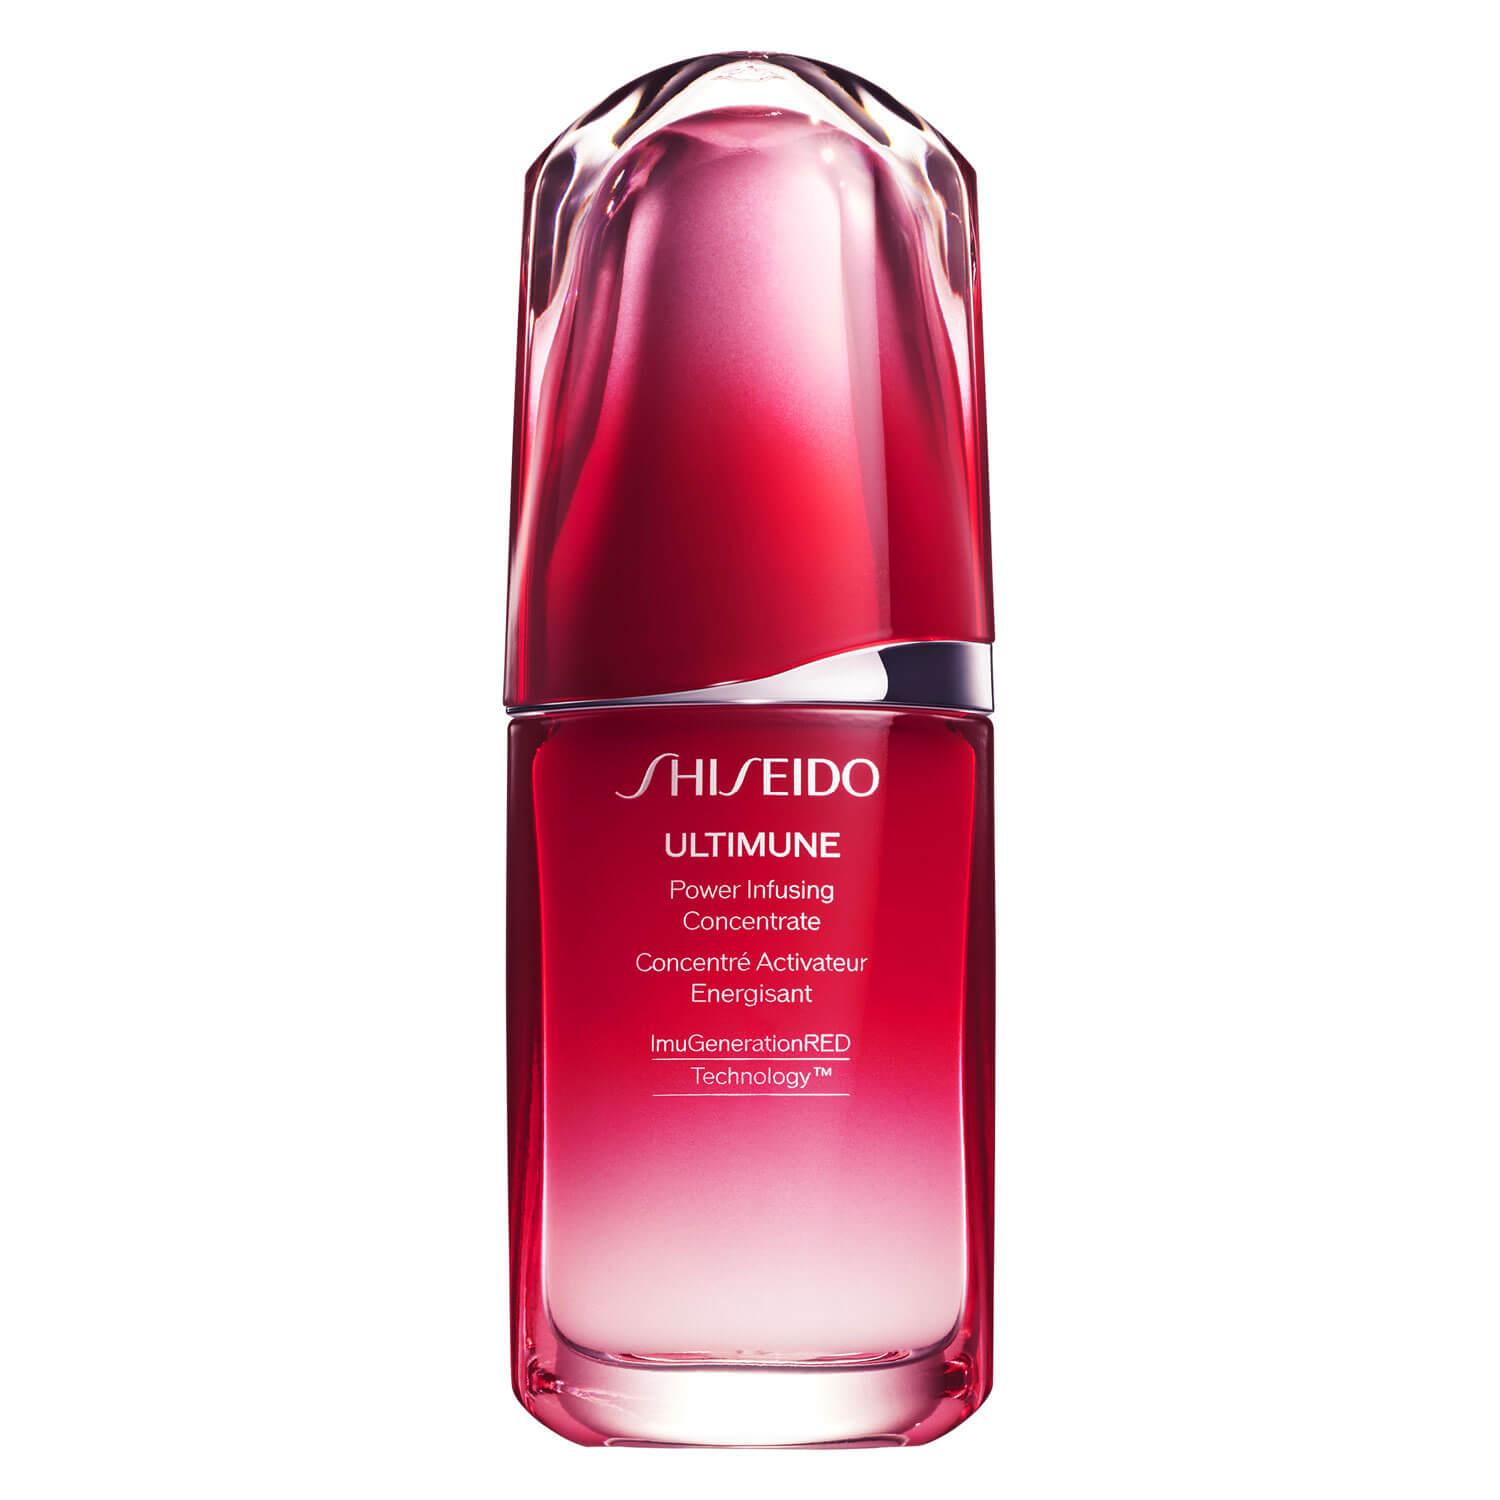 Ultimune - Power Infusing Concentrate 3.0